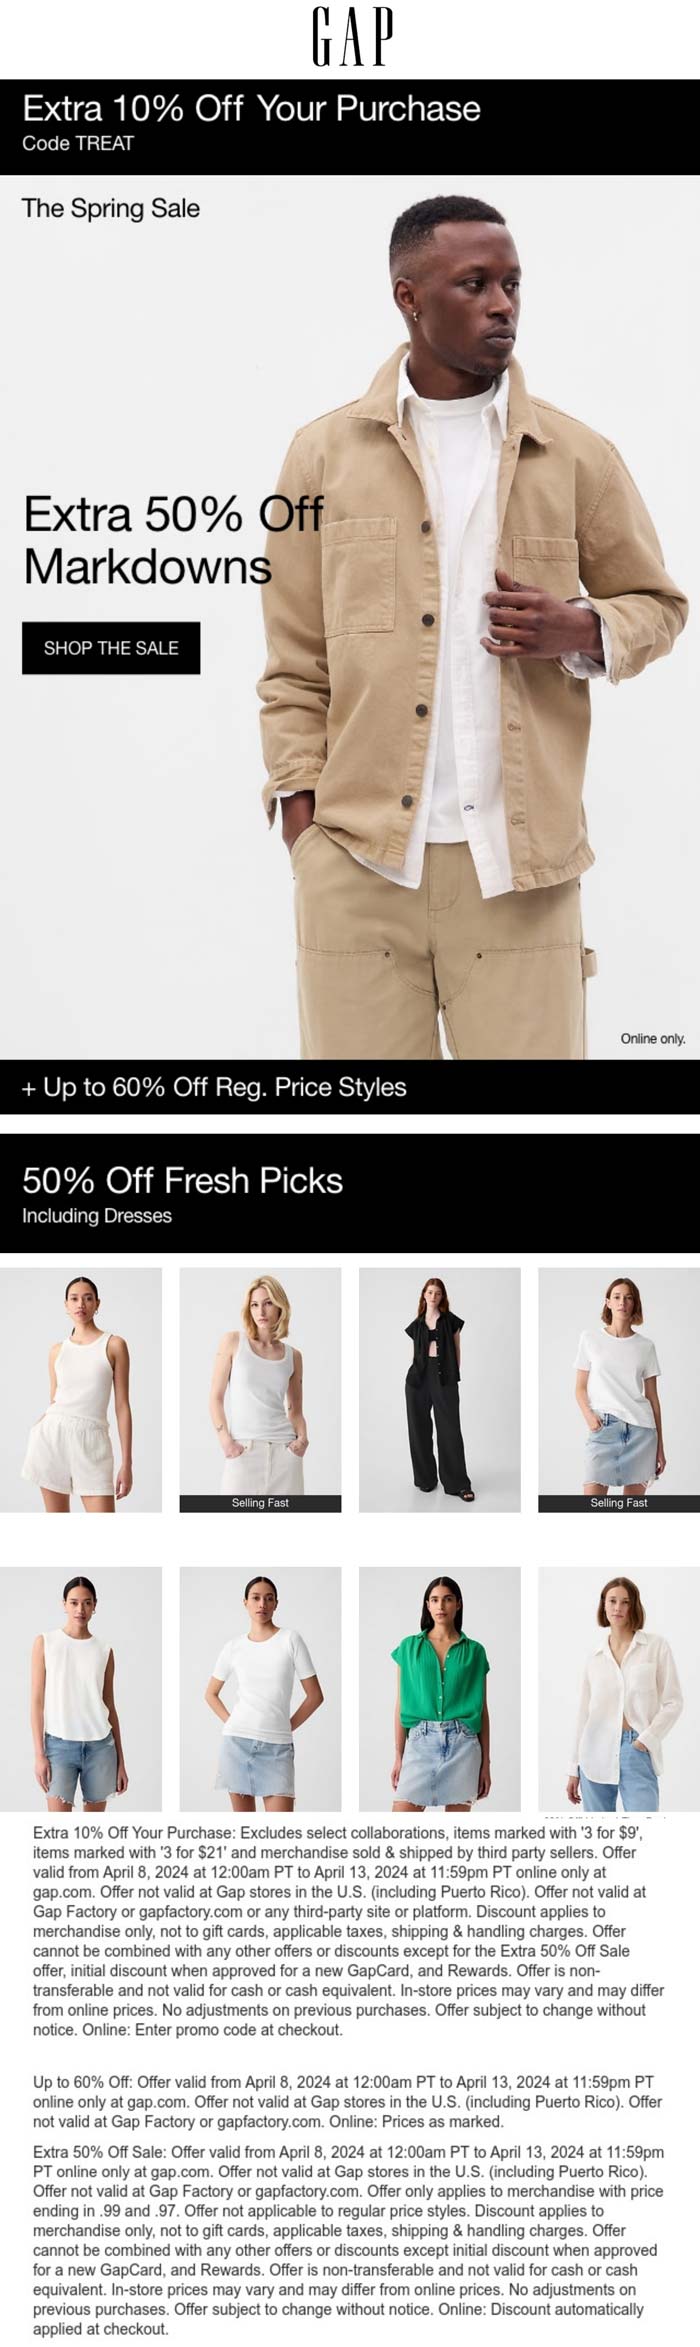 Gap stores Coupon  Extra 50% off sale items & more at Gap, or online via promo code TREAT #gap 